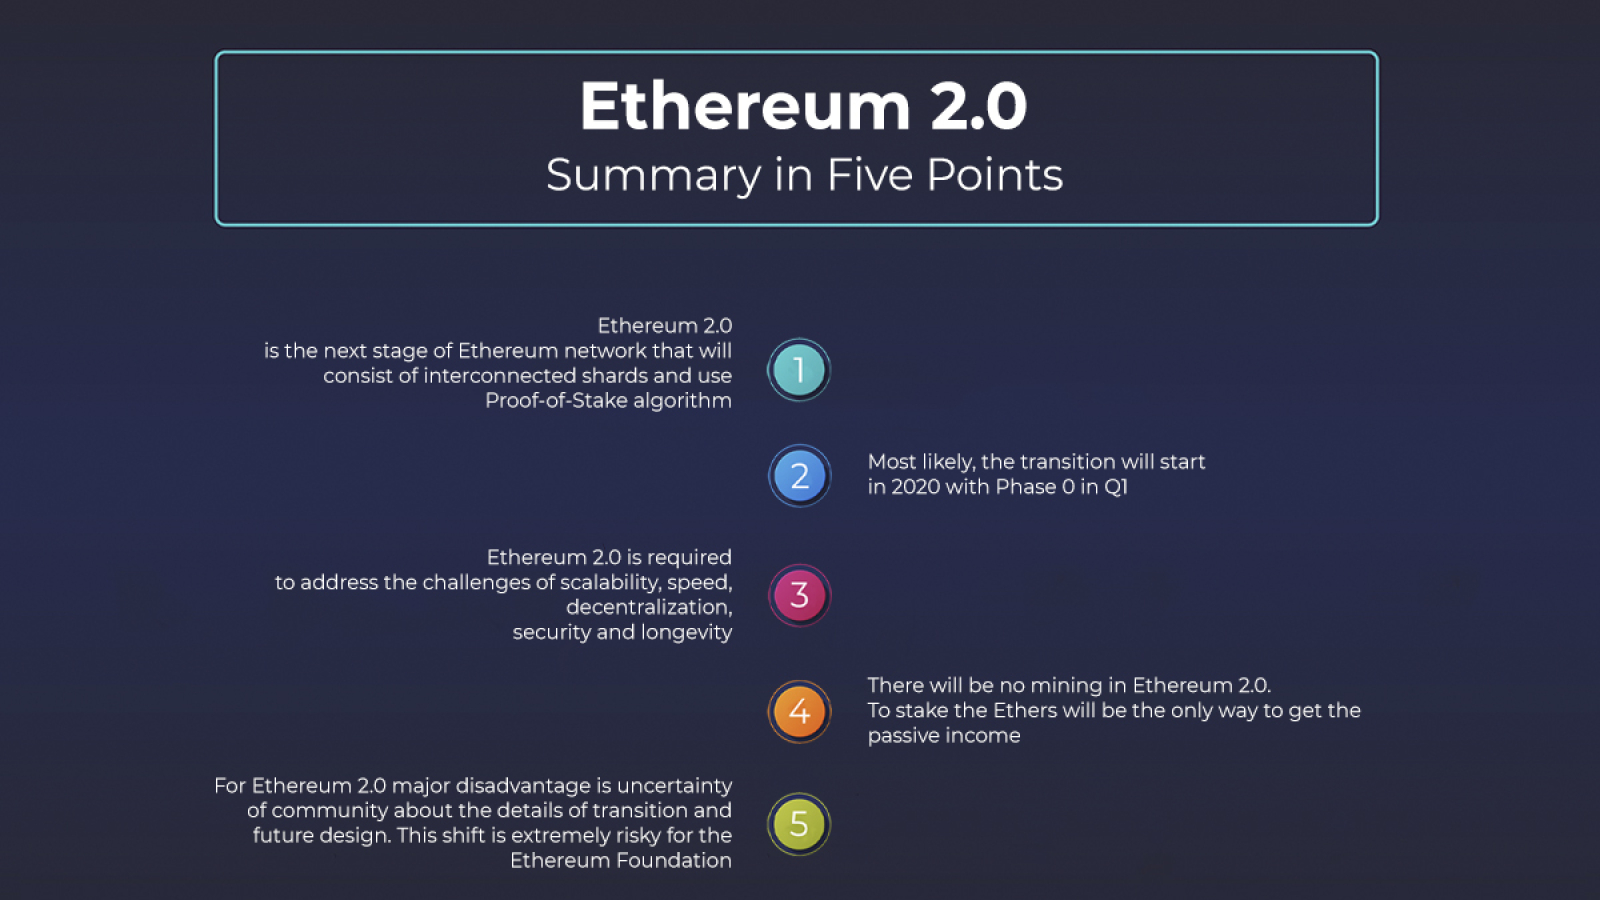 Ethereum 2.0: Summary in Five Points